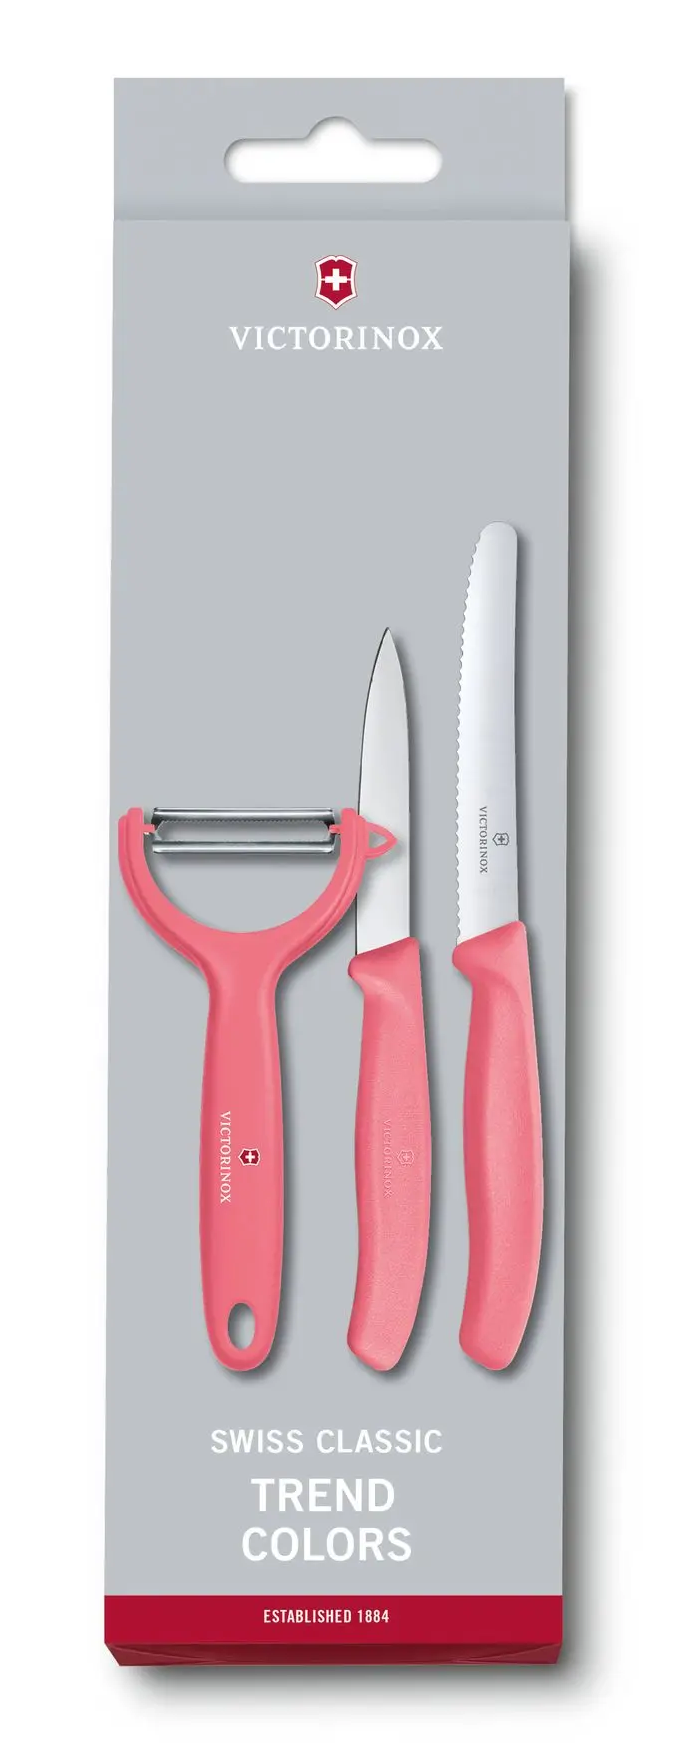 Victorinox Swiss Classic Trend Colors Paring Knife Set 3 Pieces Light Red 6.7116.33L12